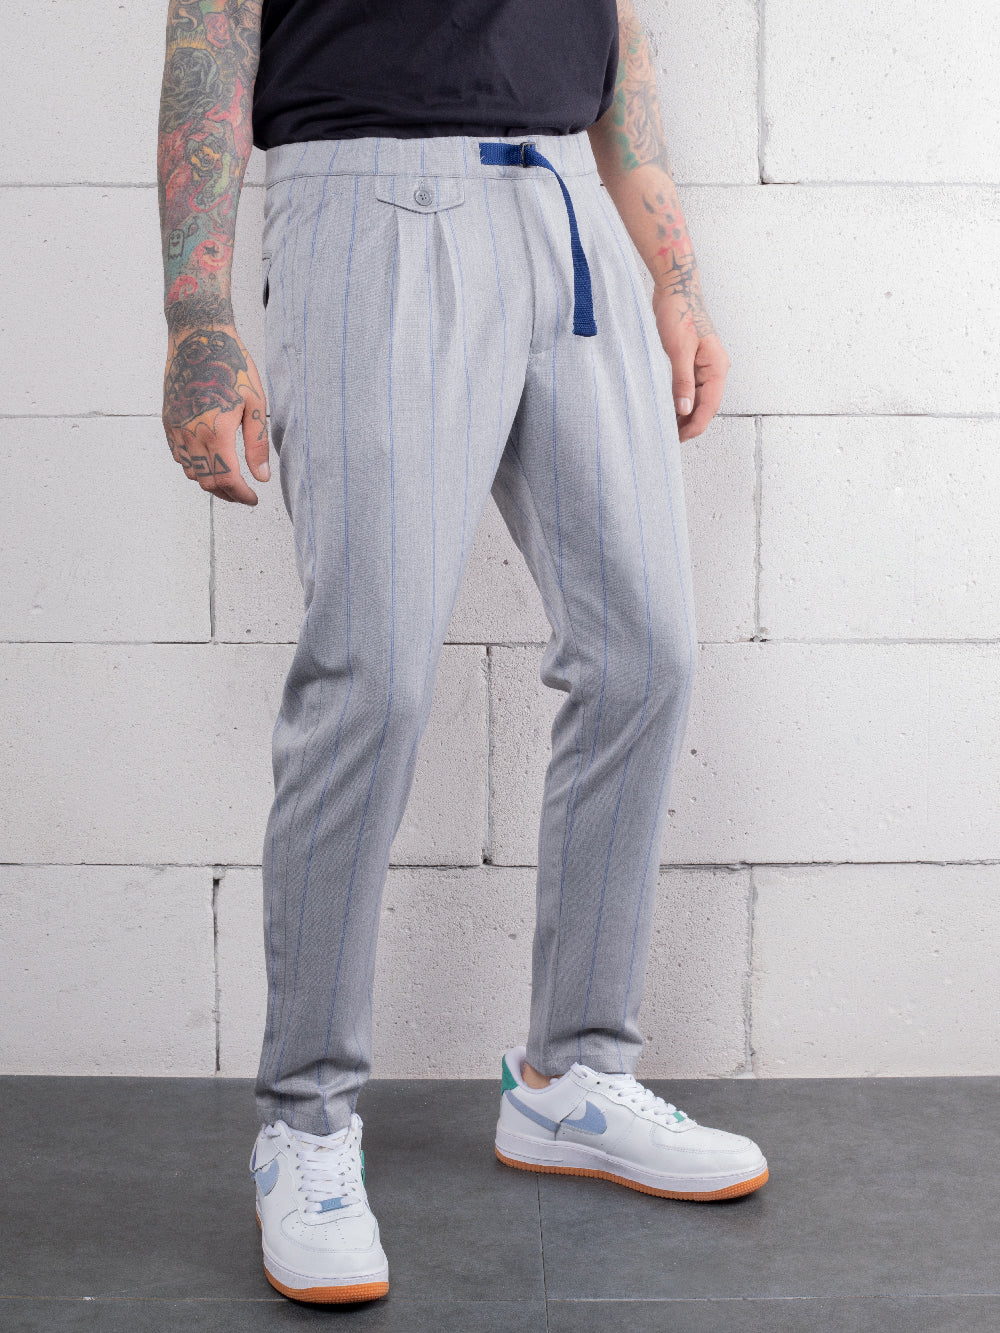 A man with tattoos is standing in front of a brick wall wearing RODEO DRIVE PANTS made from premium Italian fabric.